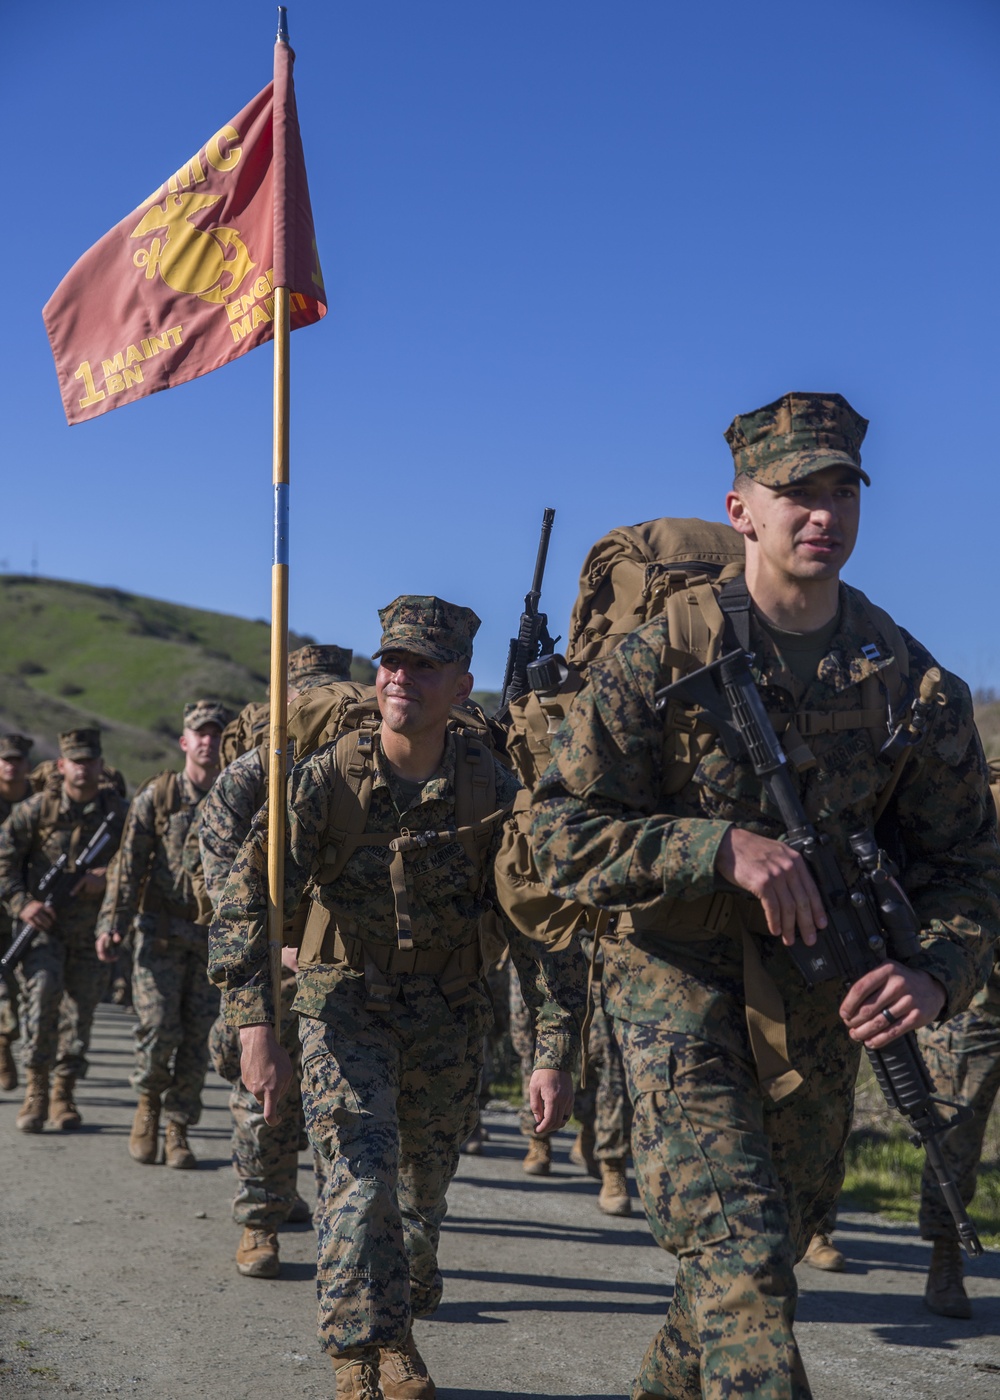 Marines with CLR-15 Hike the Hills of Camp Pendleton